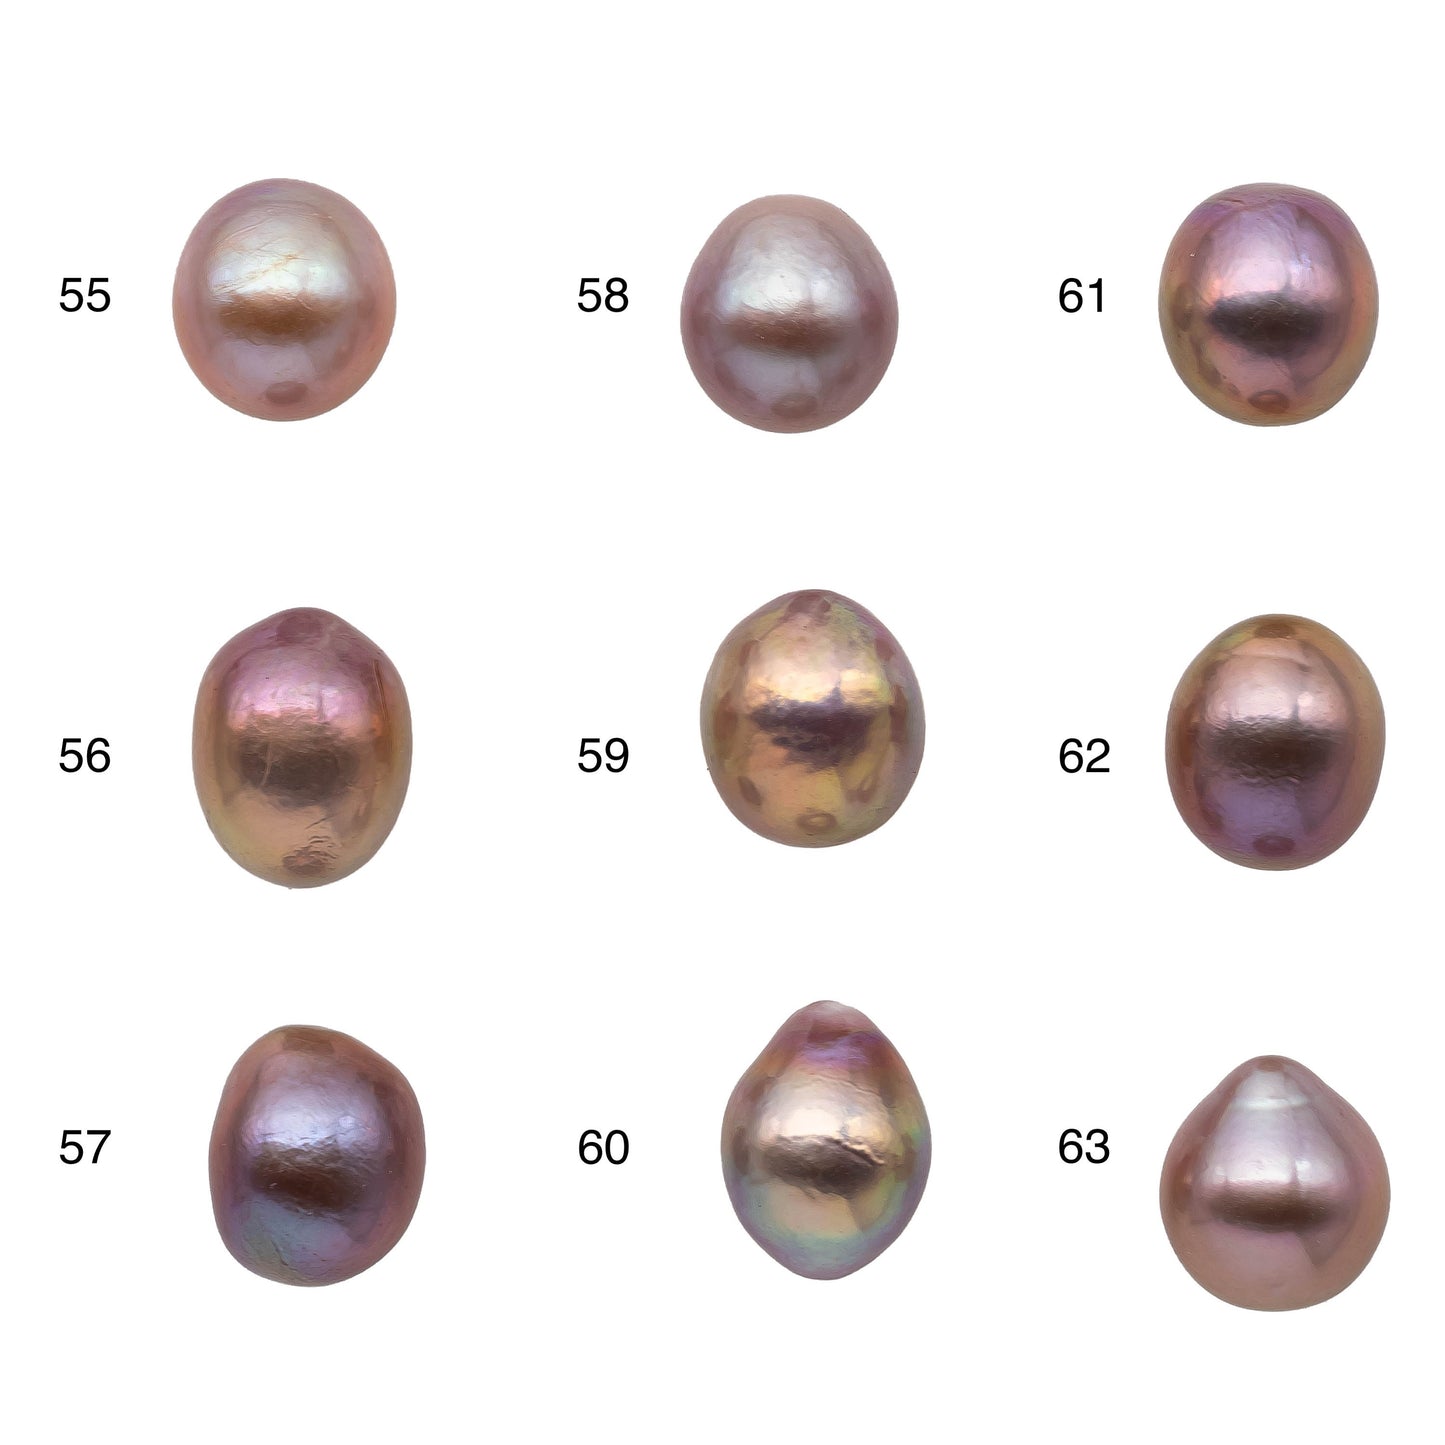 11-12mm One Piece Edison Pearl Tear Drops Loose Undrilled Natural Color with High Luster for Jewelry Making, SKU # 1167EP